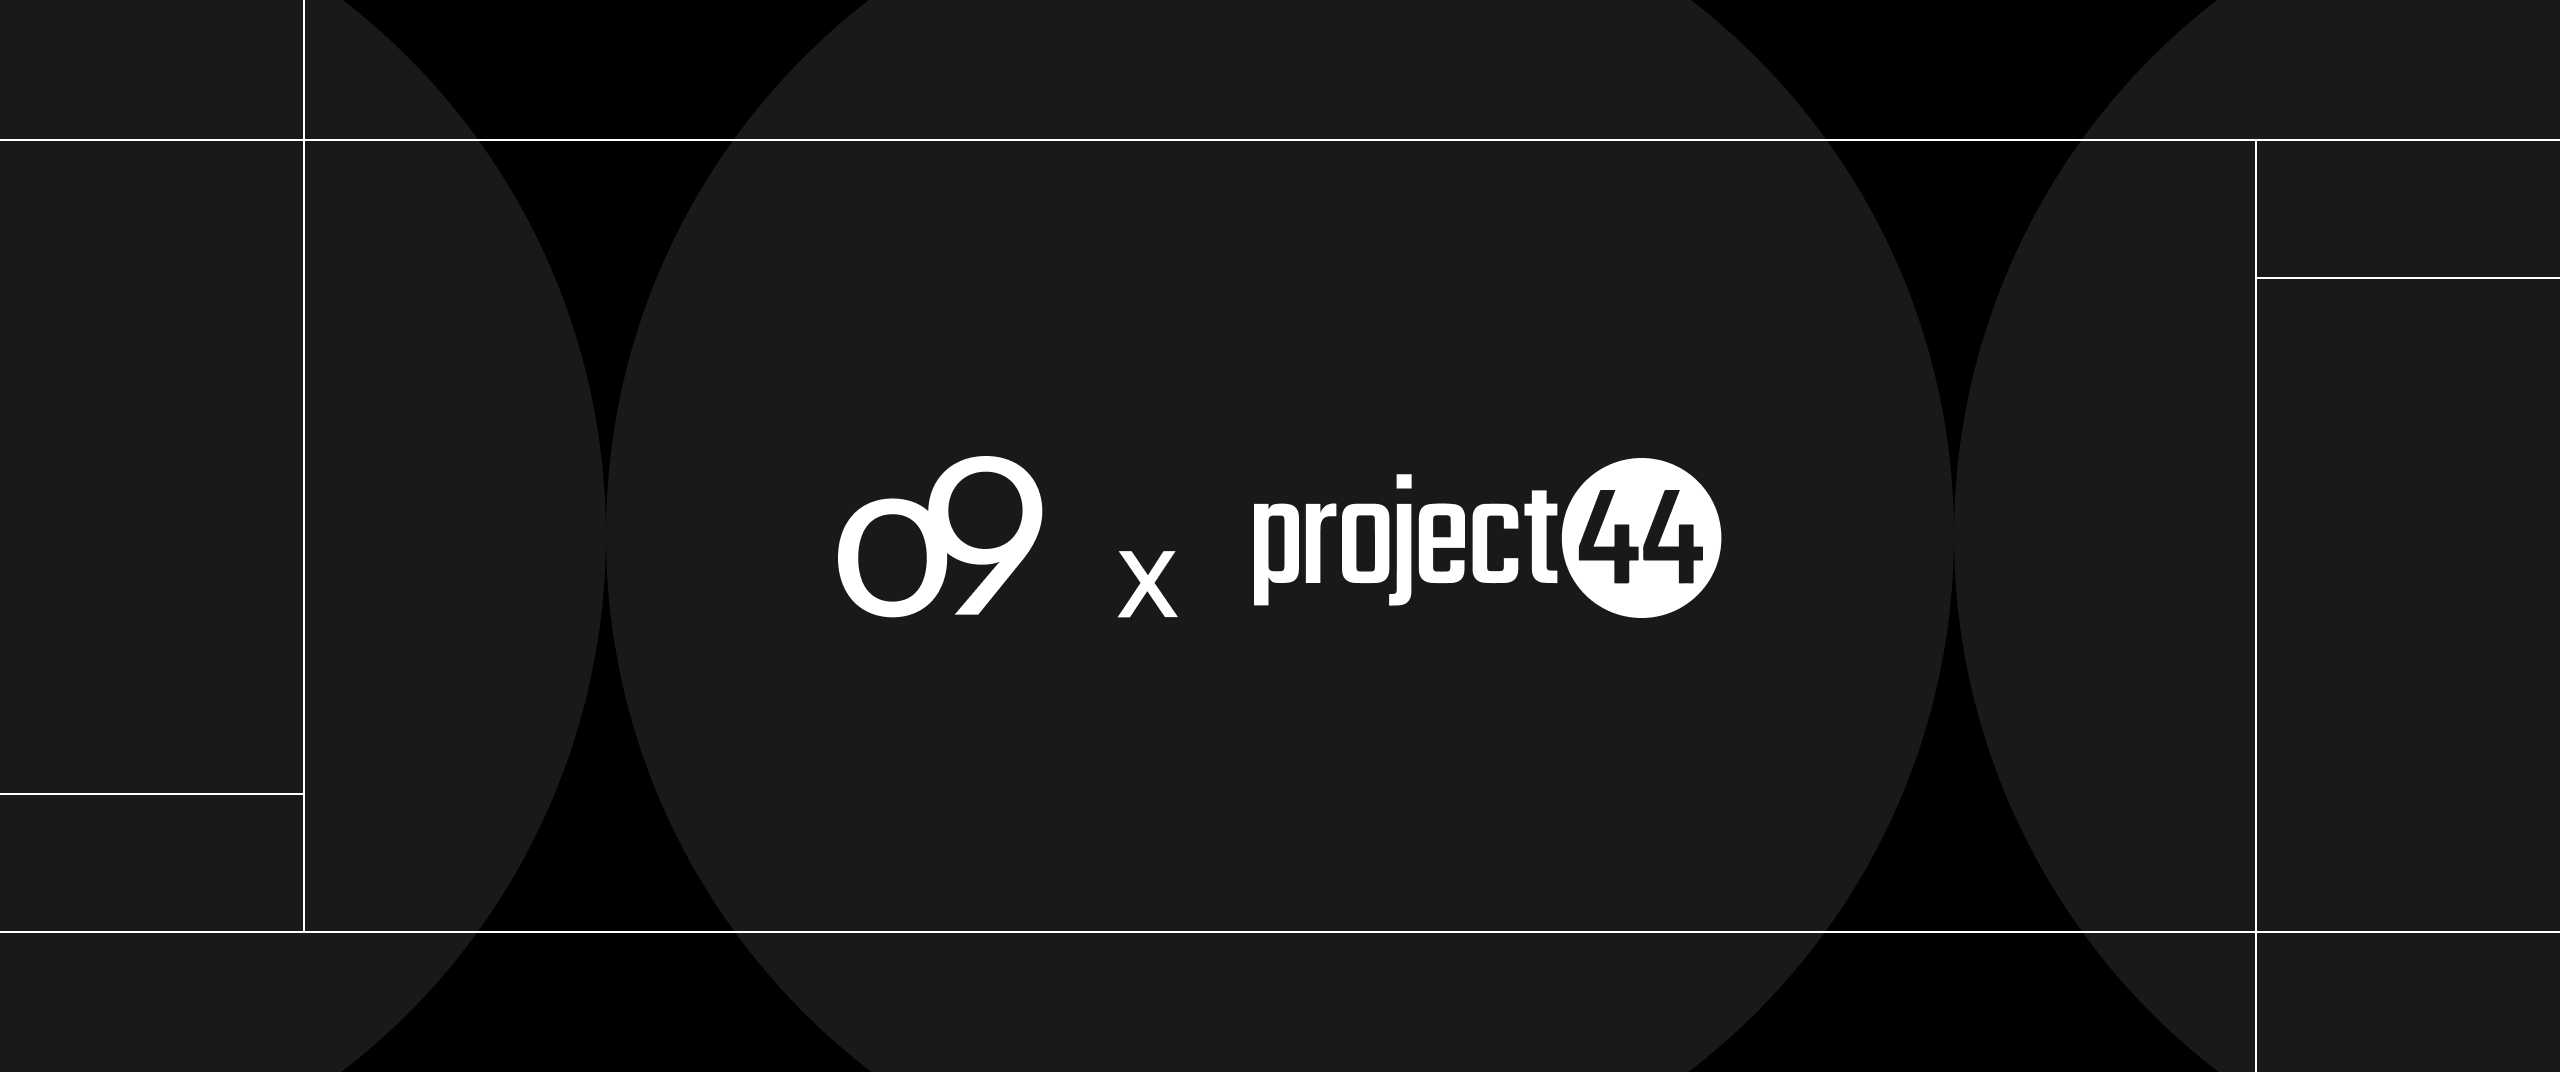 o9 Solutions and project44 Accelerate Their Partnership